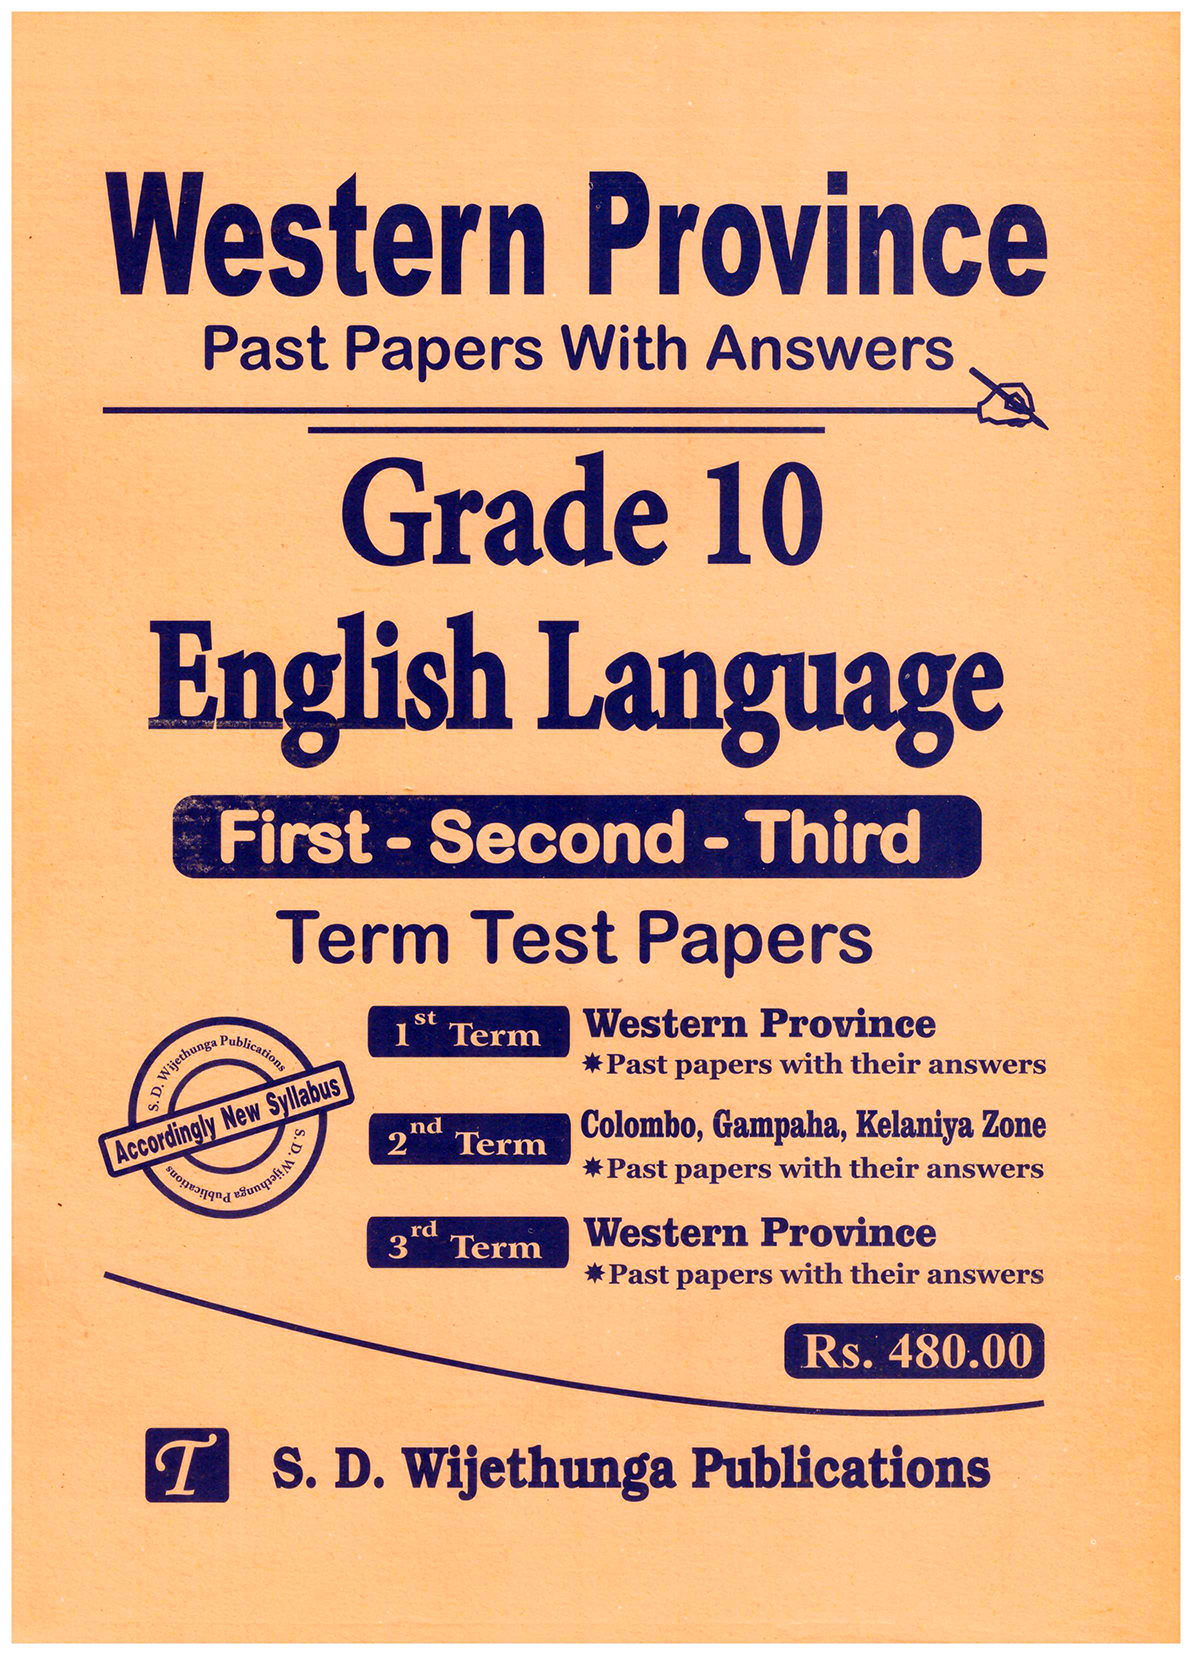 Western Province Grade 10 English Language First - Second - Third Term Test Papers : Past Papers With Answers (New Syllabus)